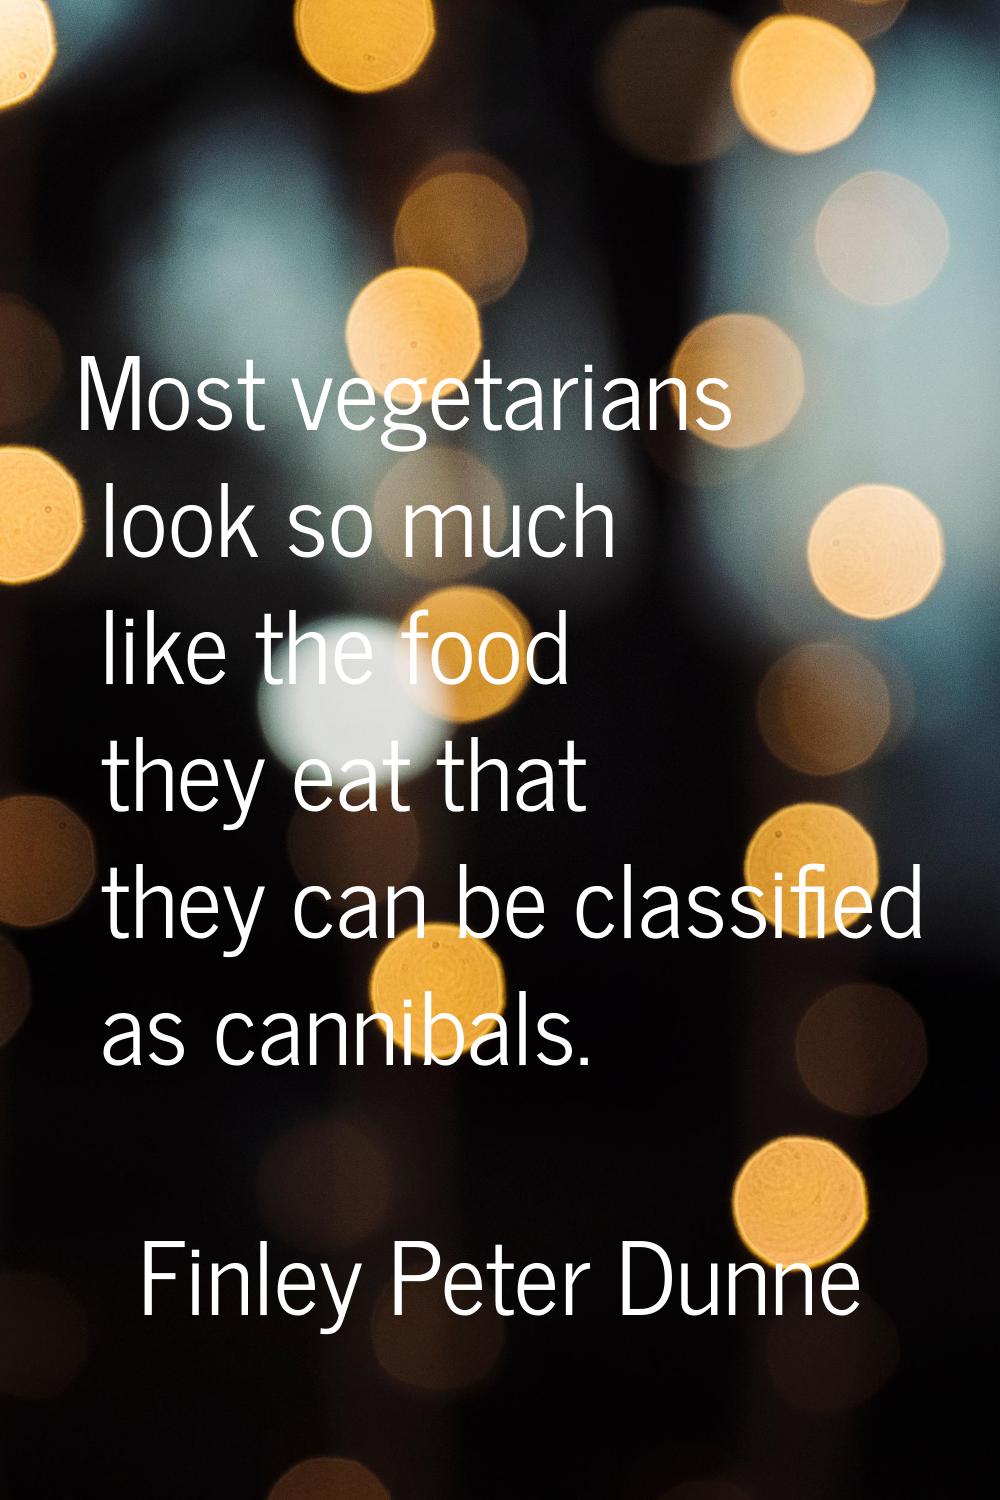 Most vegetarians look so much like the food they eat that they can be classified as cannibals.